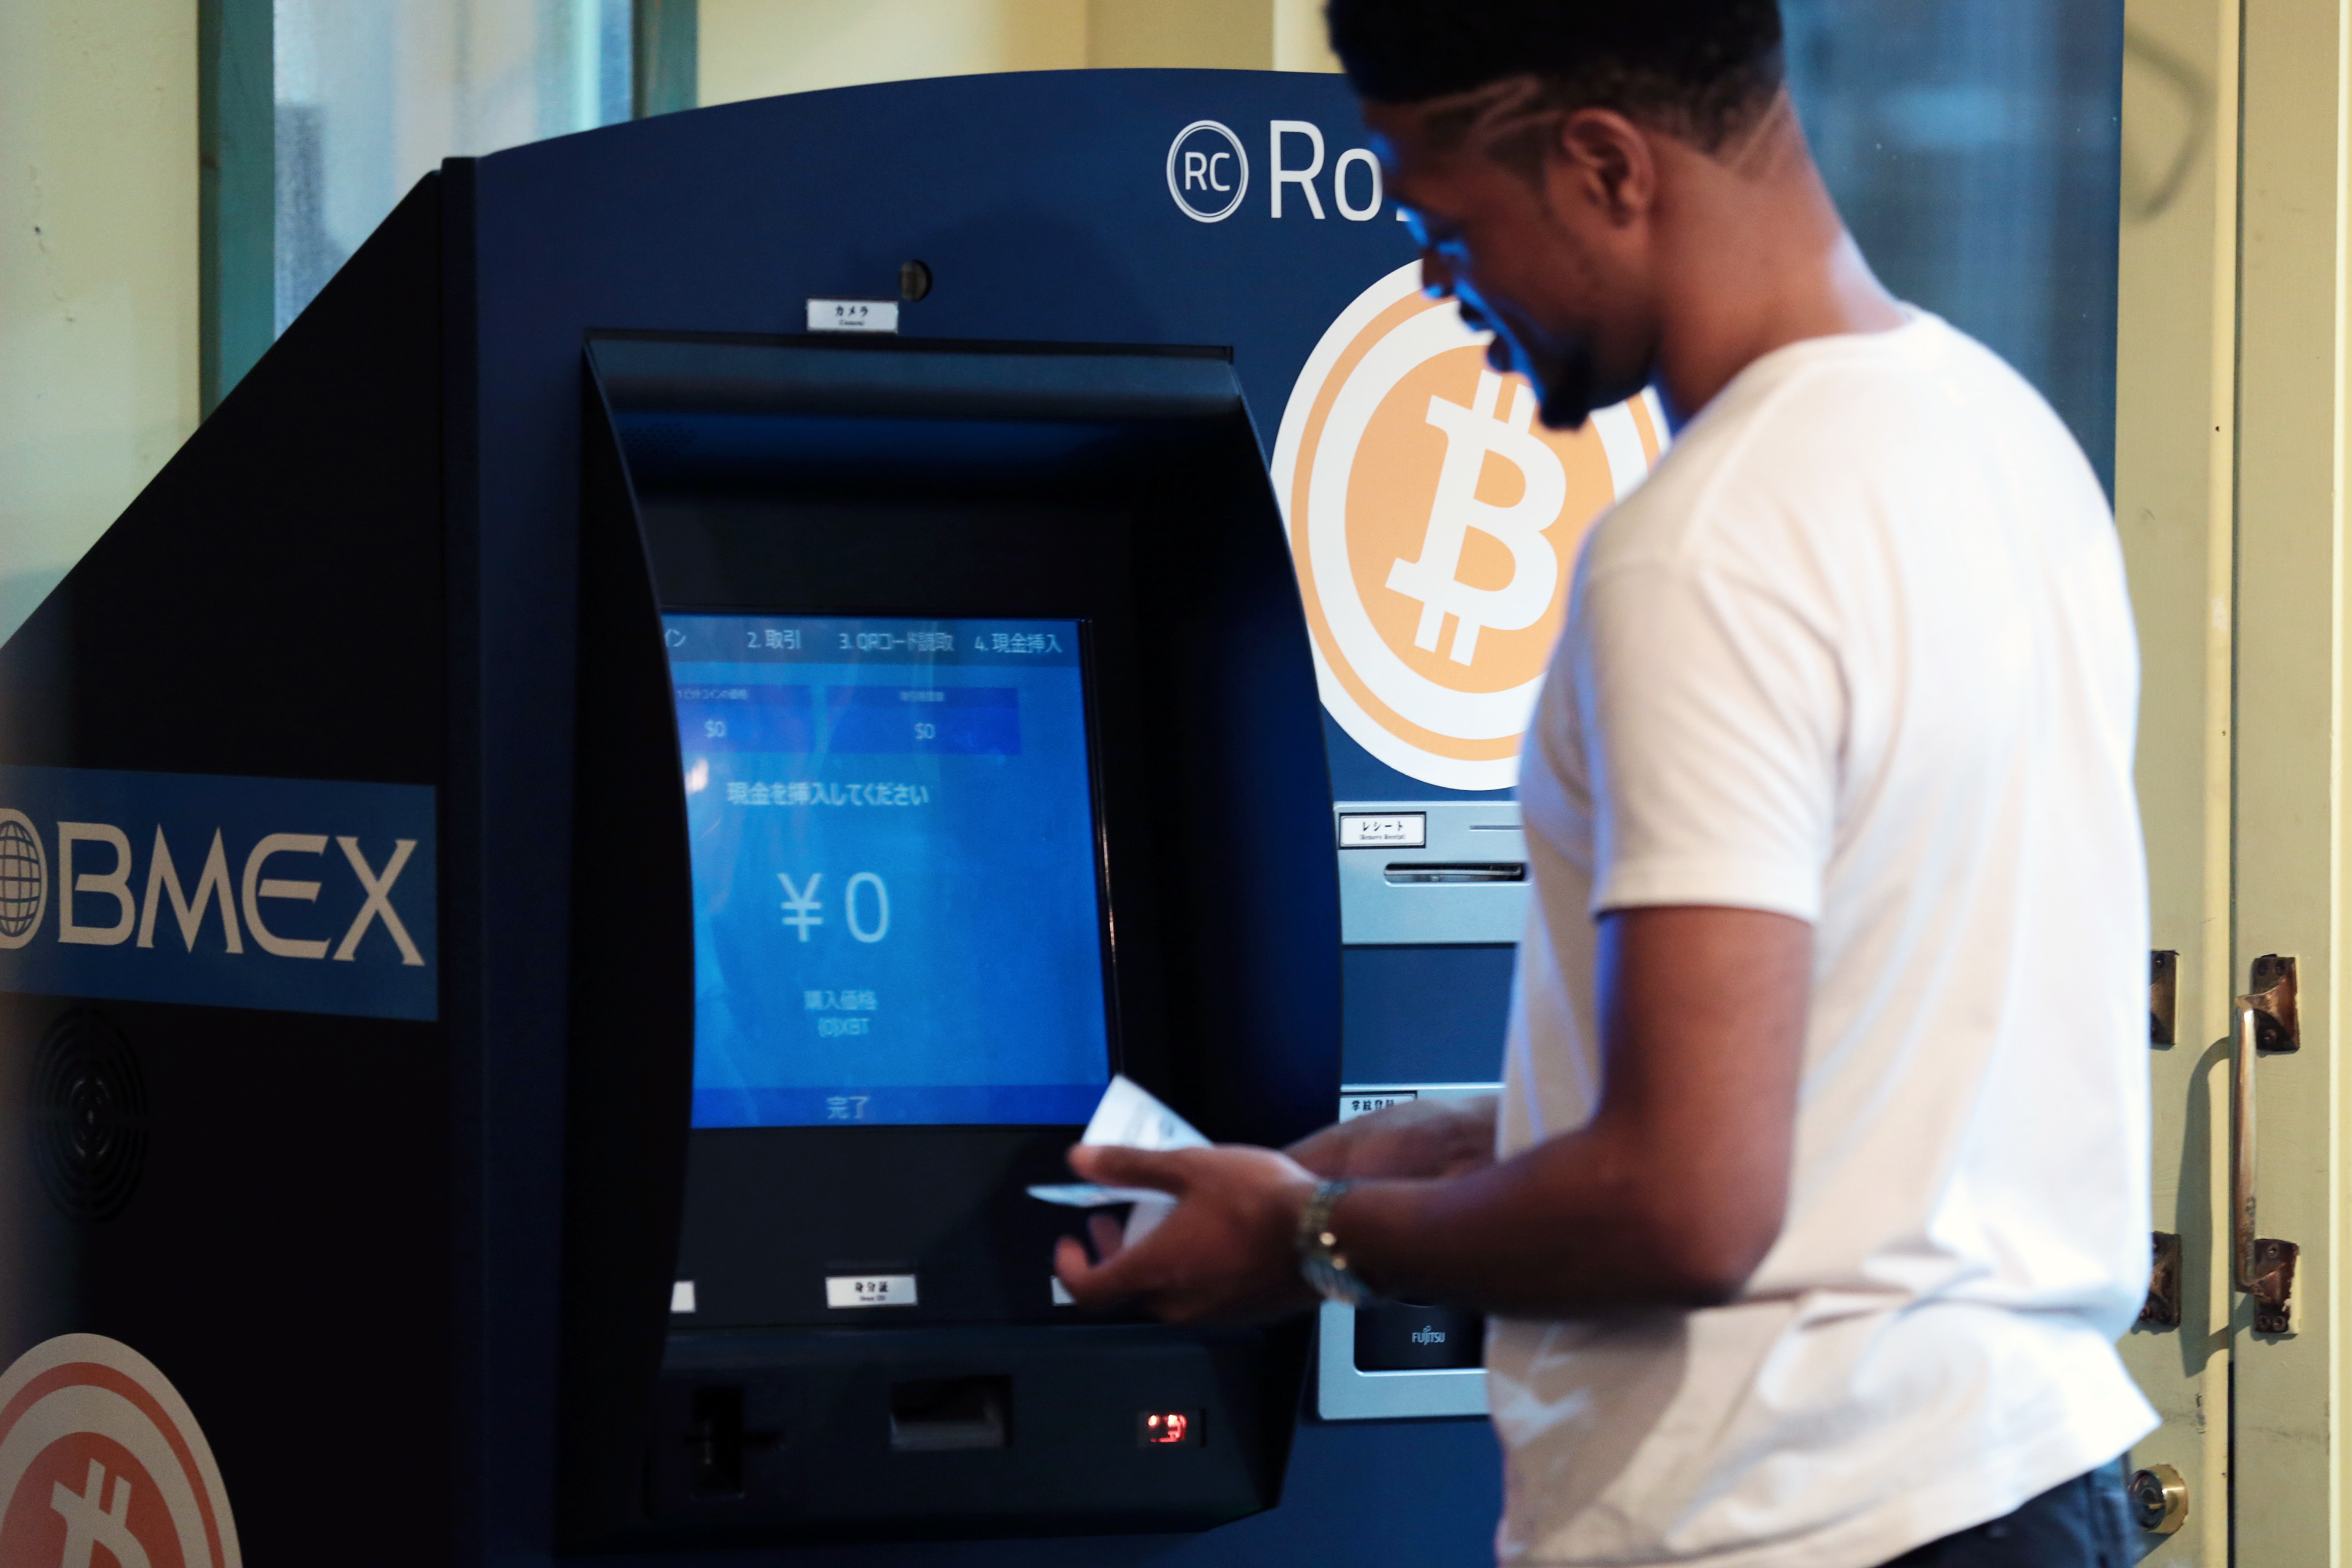 A customer purchases bitcoins from the BMEX bitcoin exchange's Robocoin-branded ATM in Tokyo, Japan, on Wednesday, June 18, 2014. (Bloomberg via Getty Images)